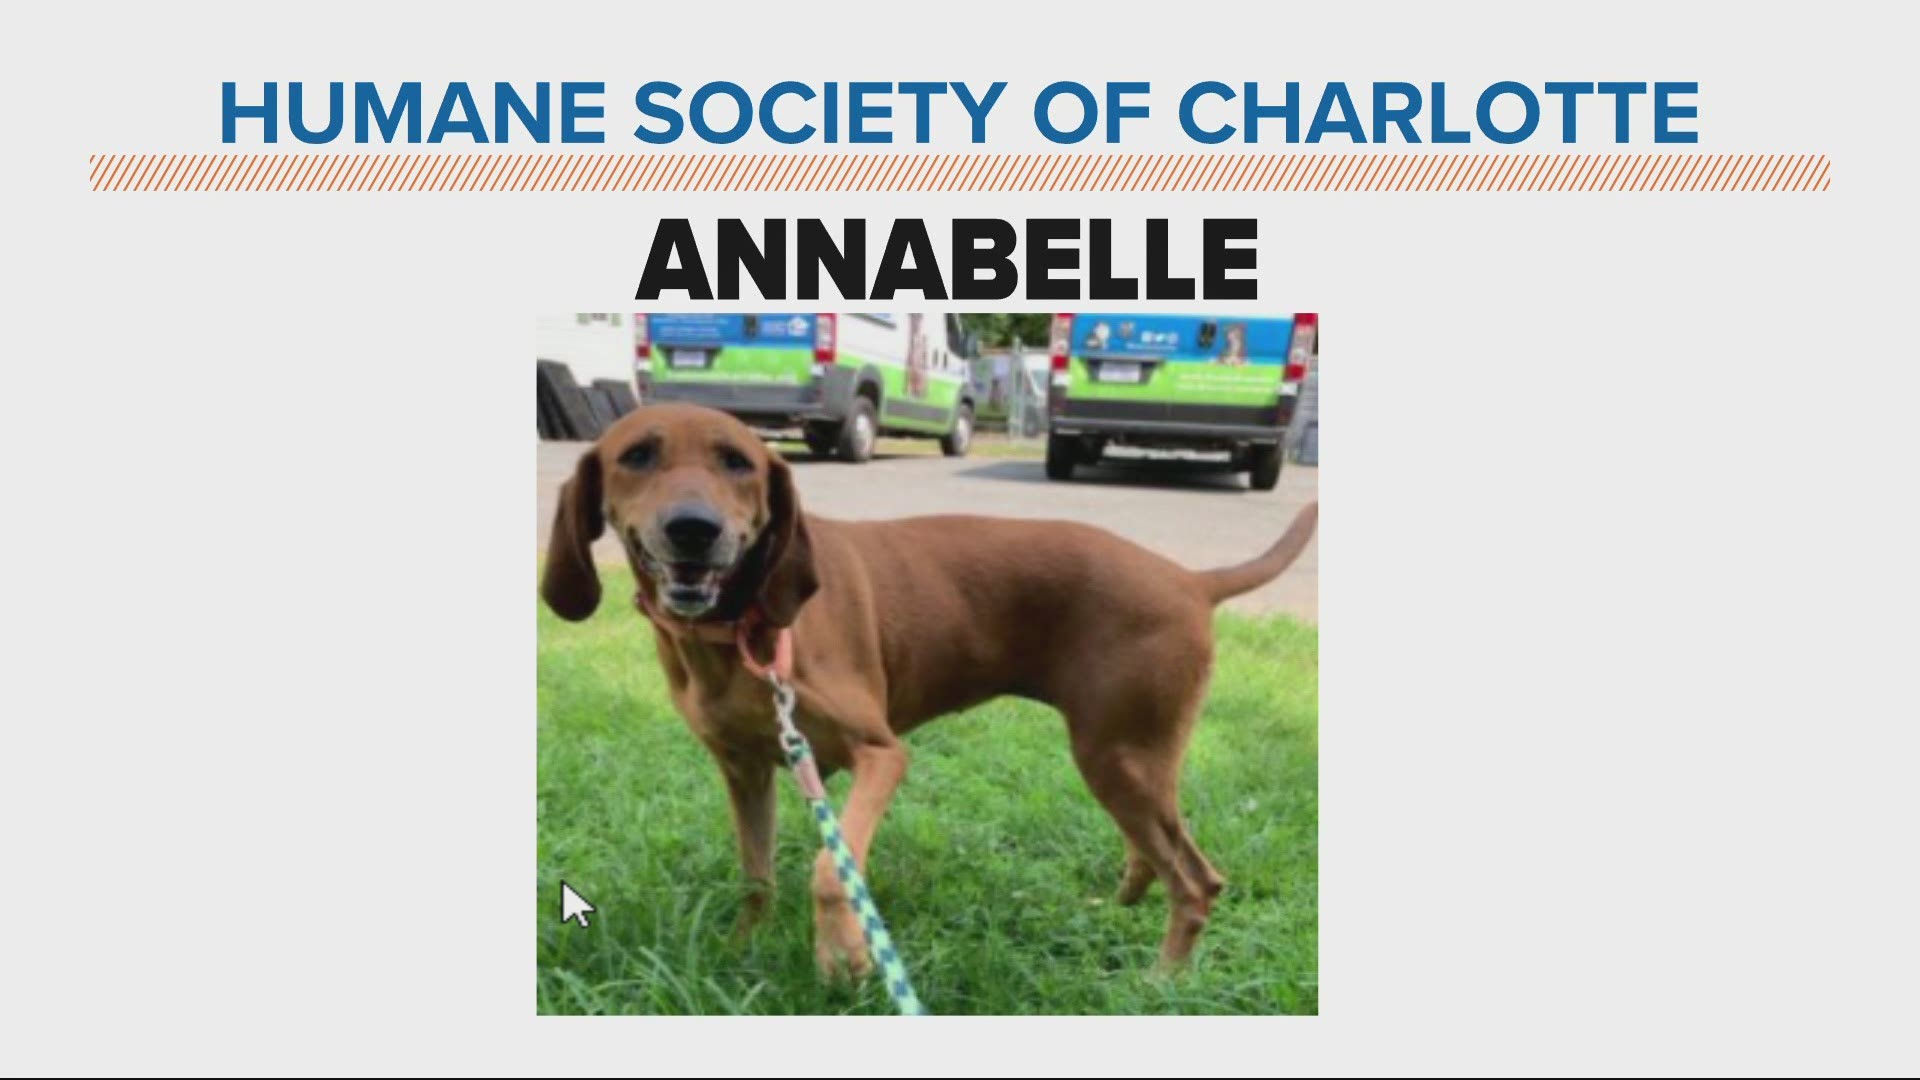 Annabelle is a female, 4-year-old bloodhound. She is very loveable and playful.